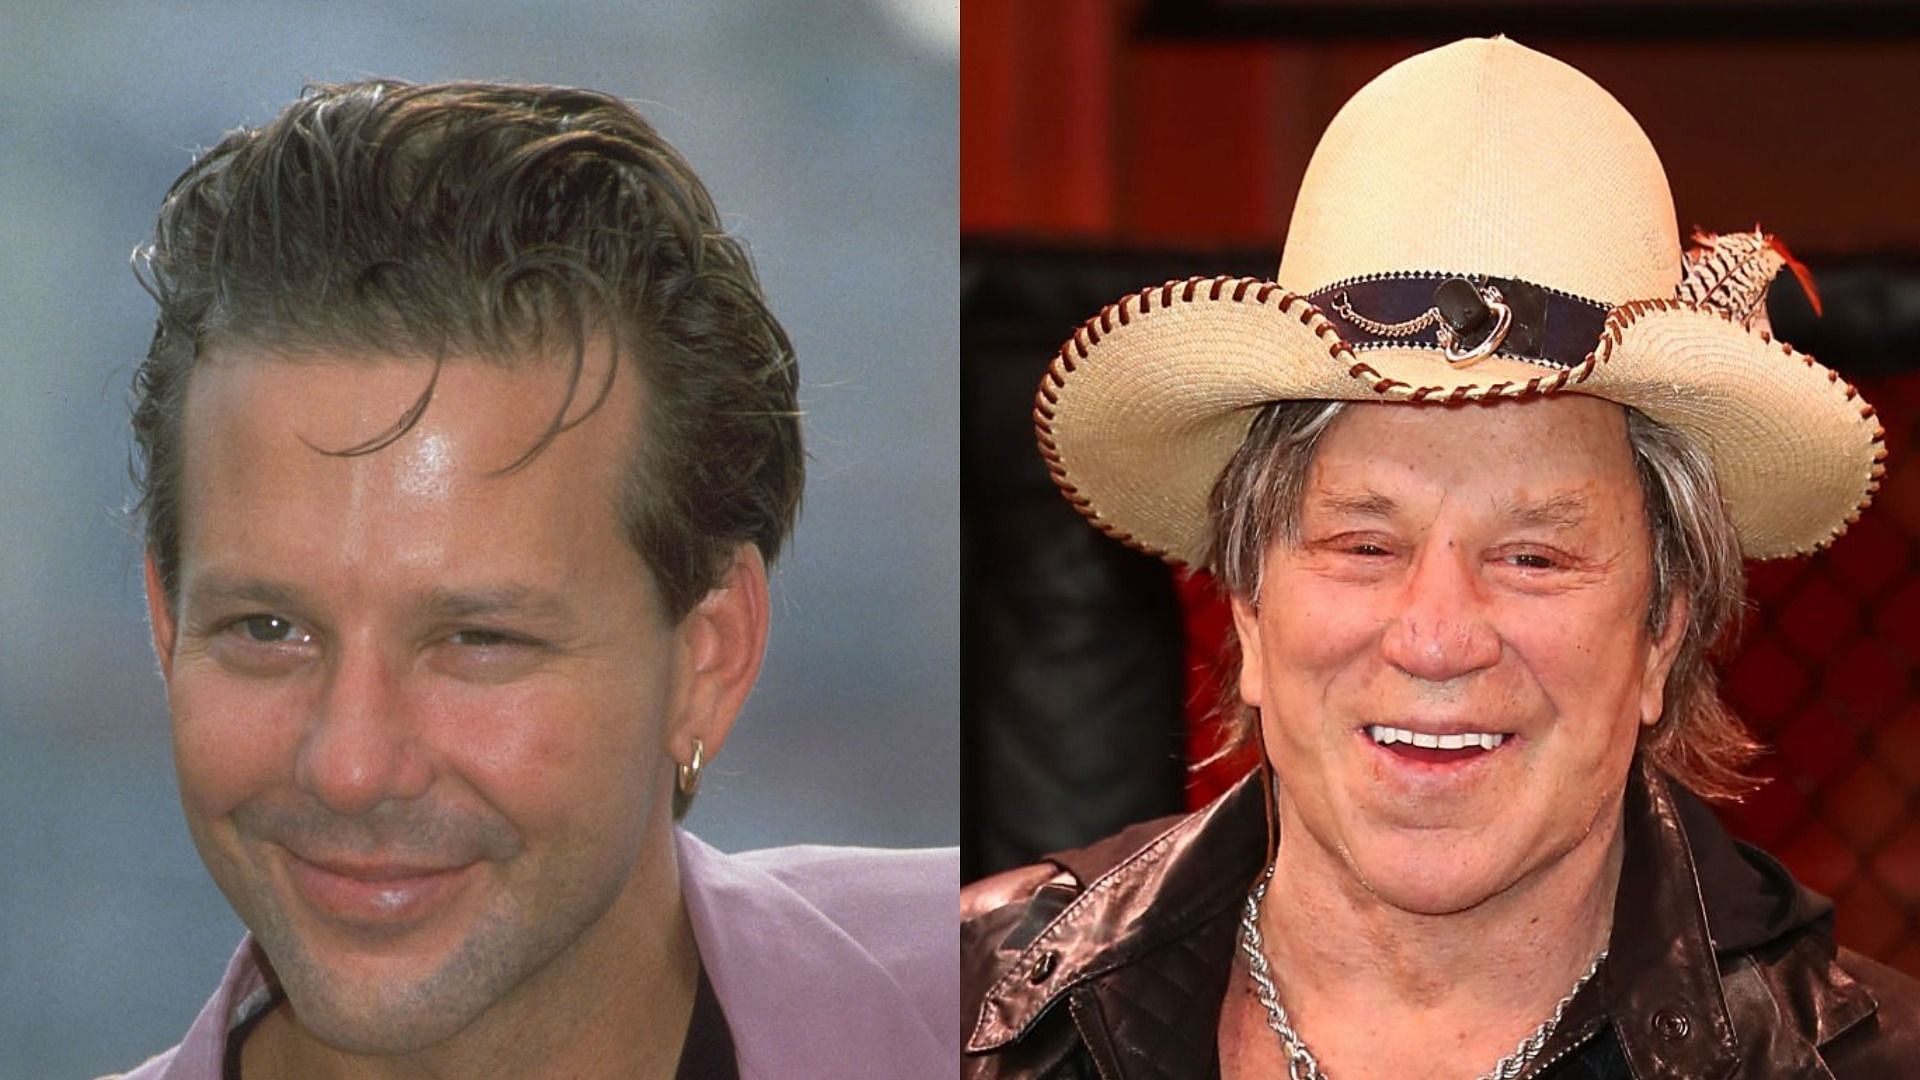 Mickey Rourke&#039;s looks garnered renewed attention after recent Newsmax appearance (Image via Diane Freed/Getty Images and Joe Scarnici/Getty Images)